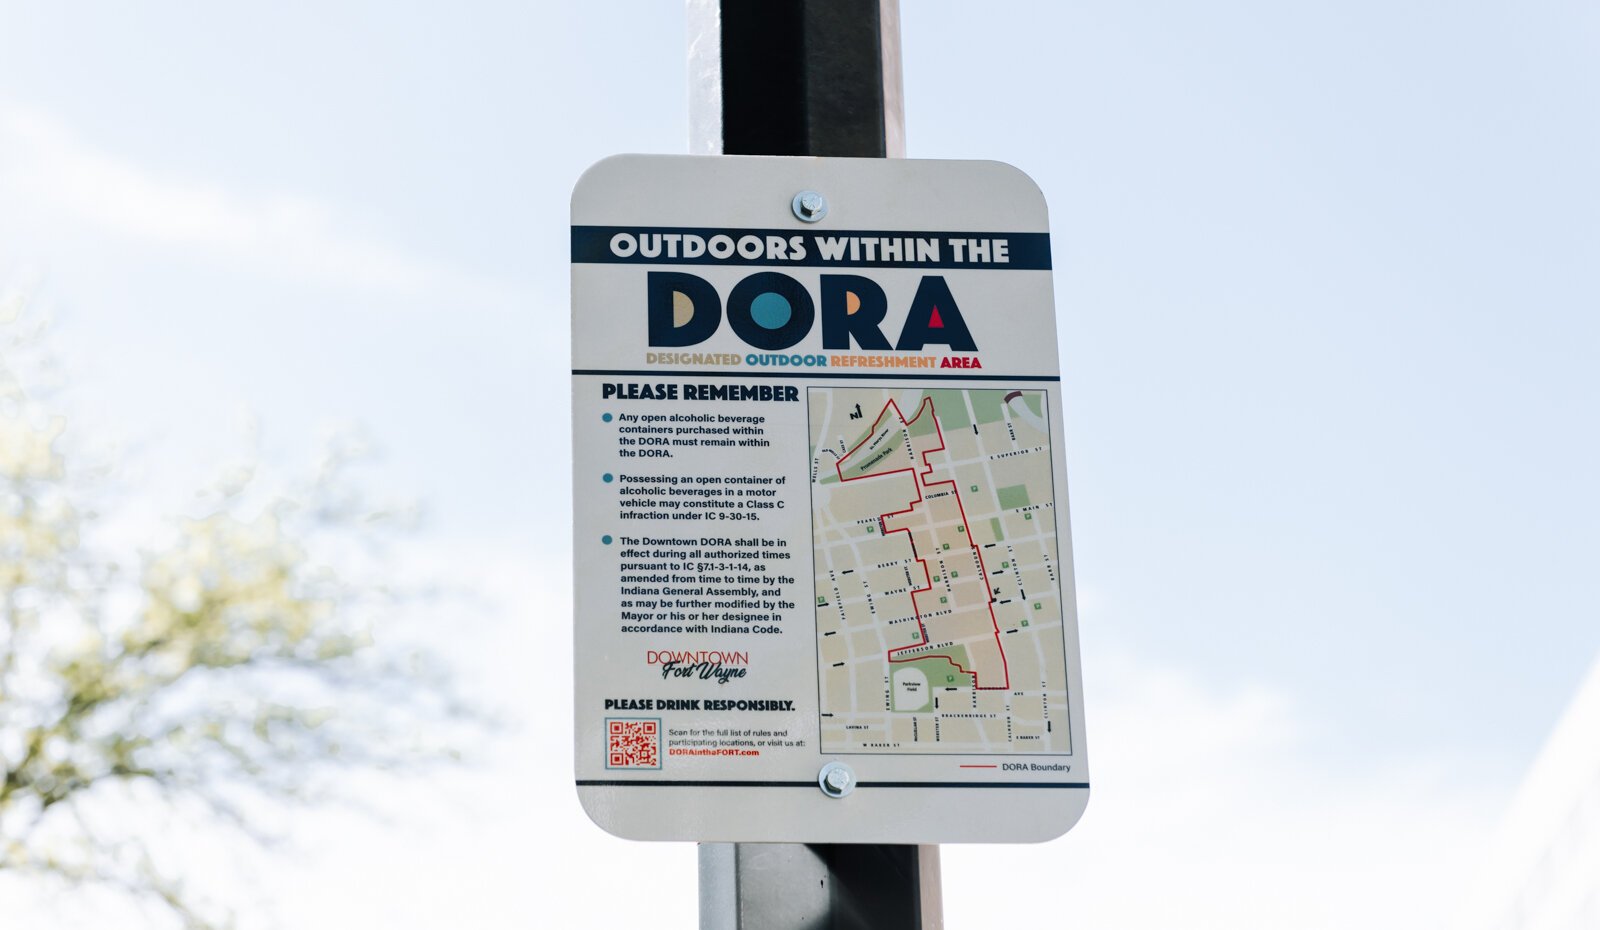 A sign at Washington Boulevard and Calhoun Street reminds people of the rules within the new Downtown DORA (Designated Outdoor Refreshment Area).